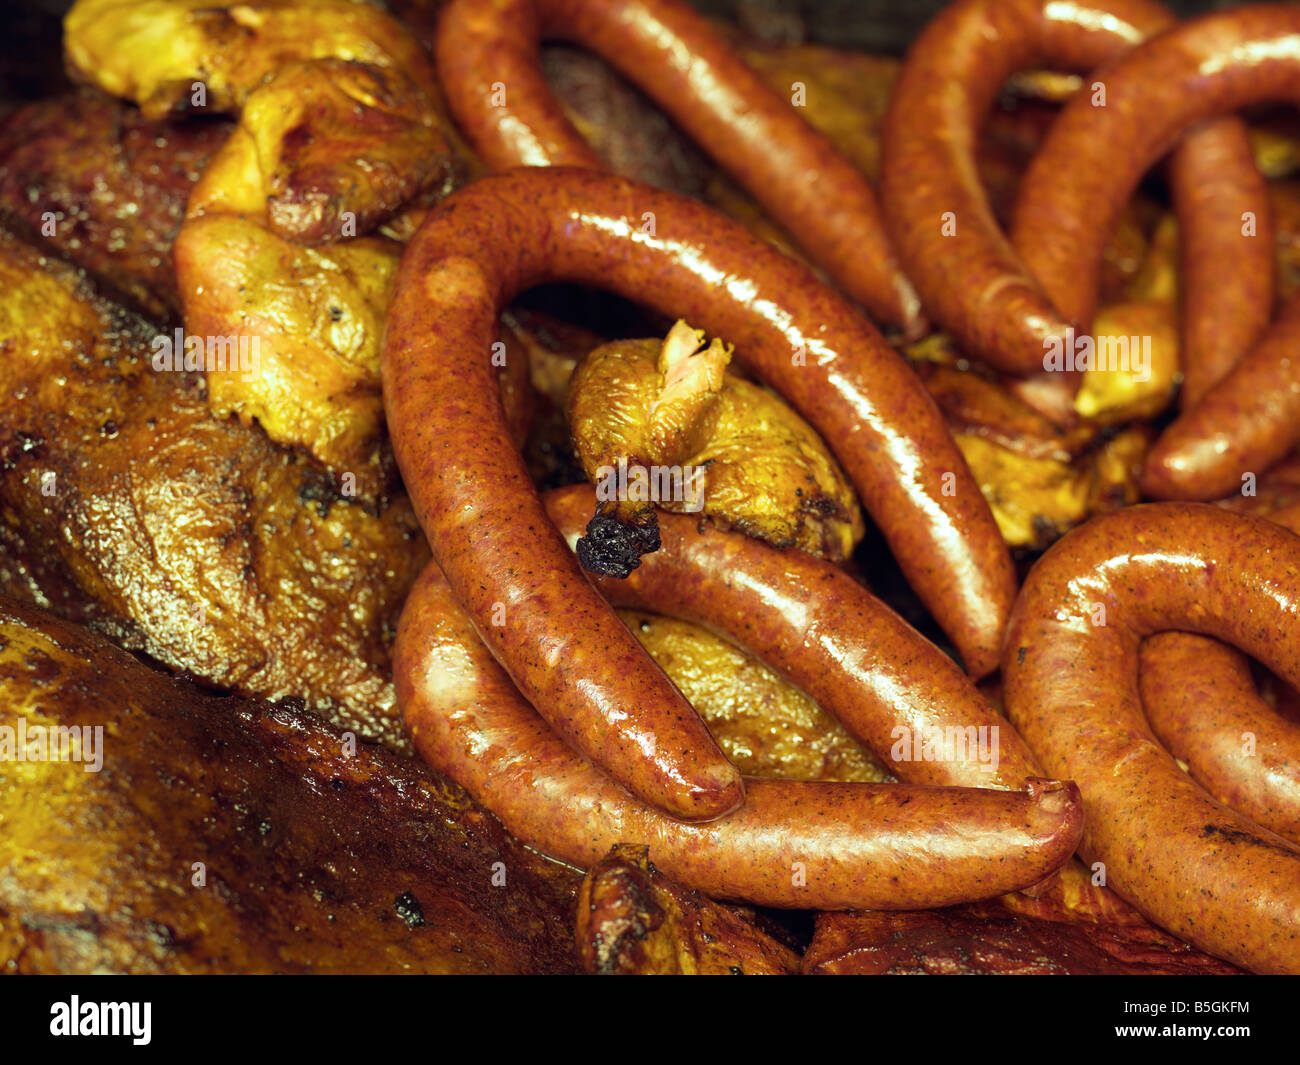 USA,Texas,Houston,Texas BBQ sausage and chicken grilling in an open pit BBQ grill Stock Photo